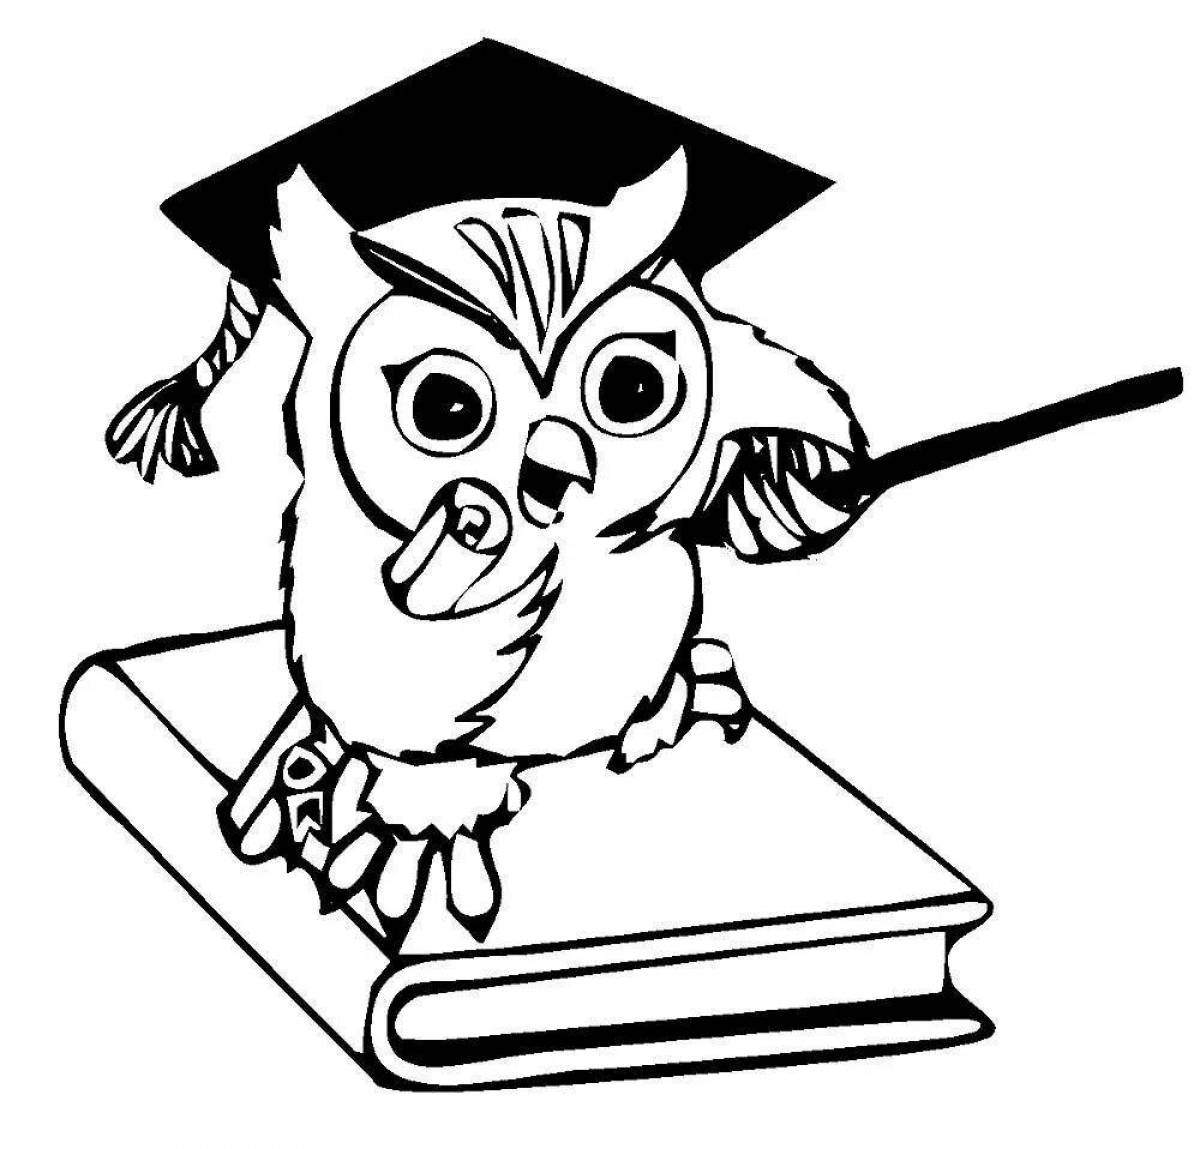 Adorable wise owl coloring book for kids